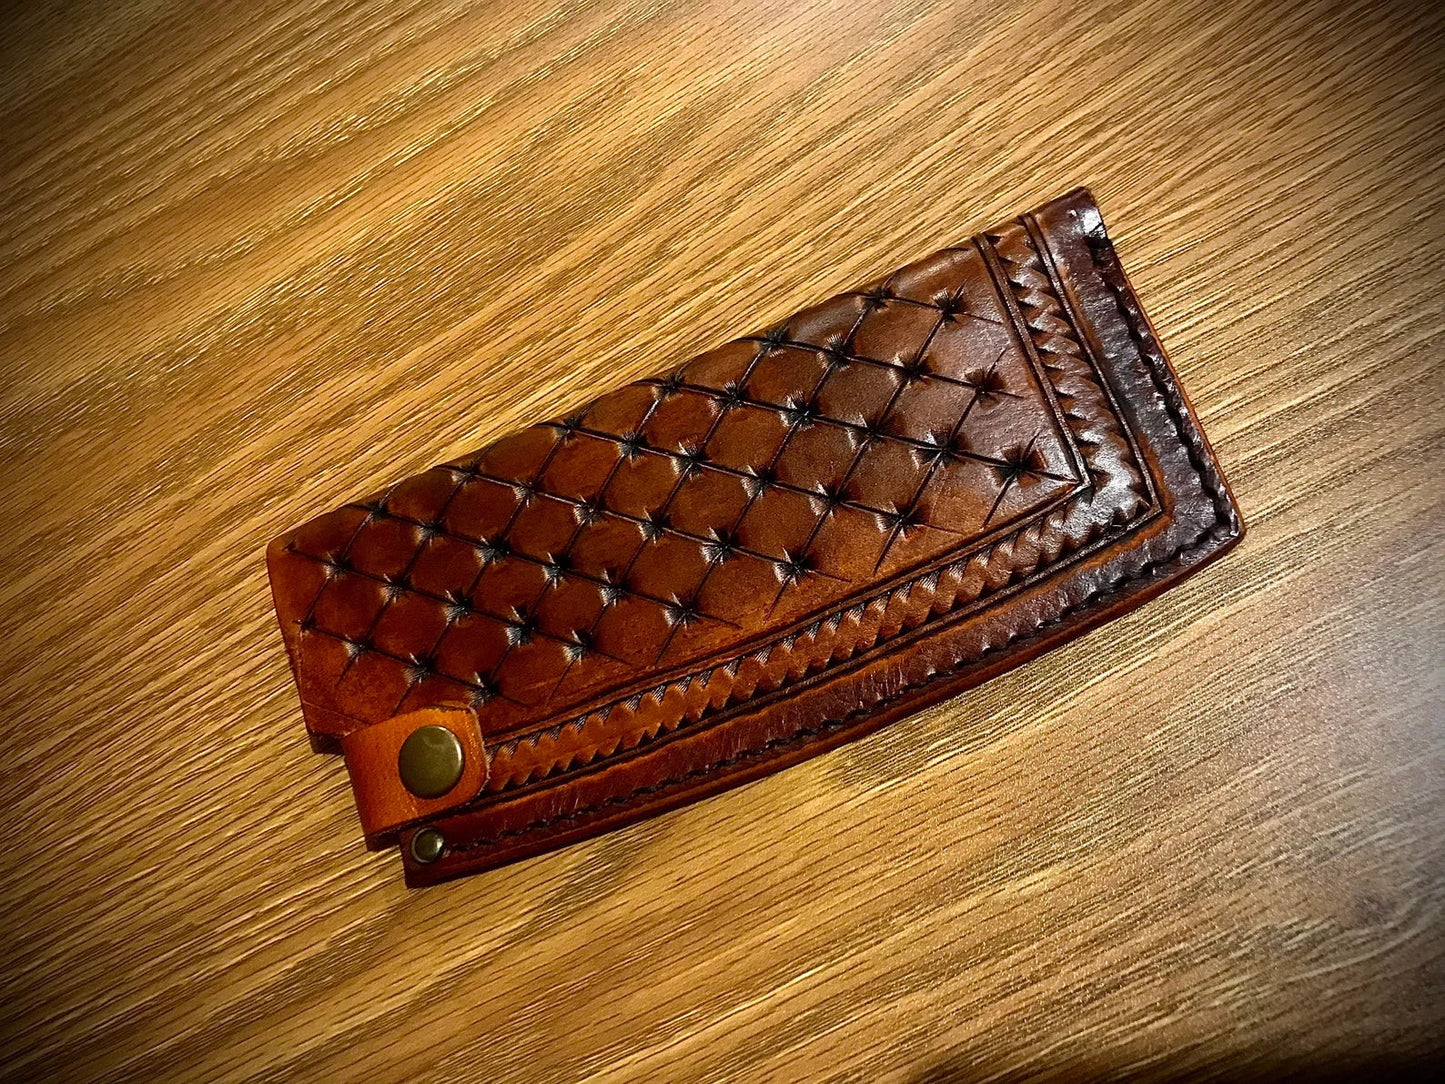 Hand tooled leather Kitchen sheath - Upholstery